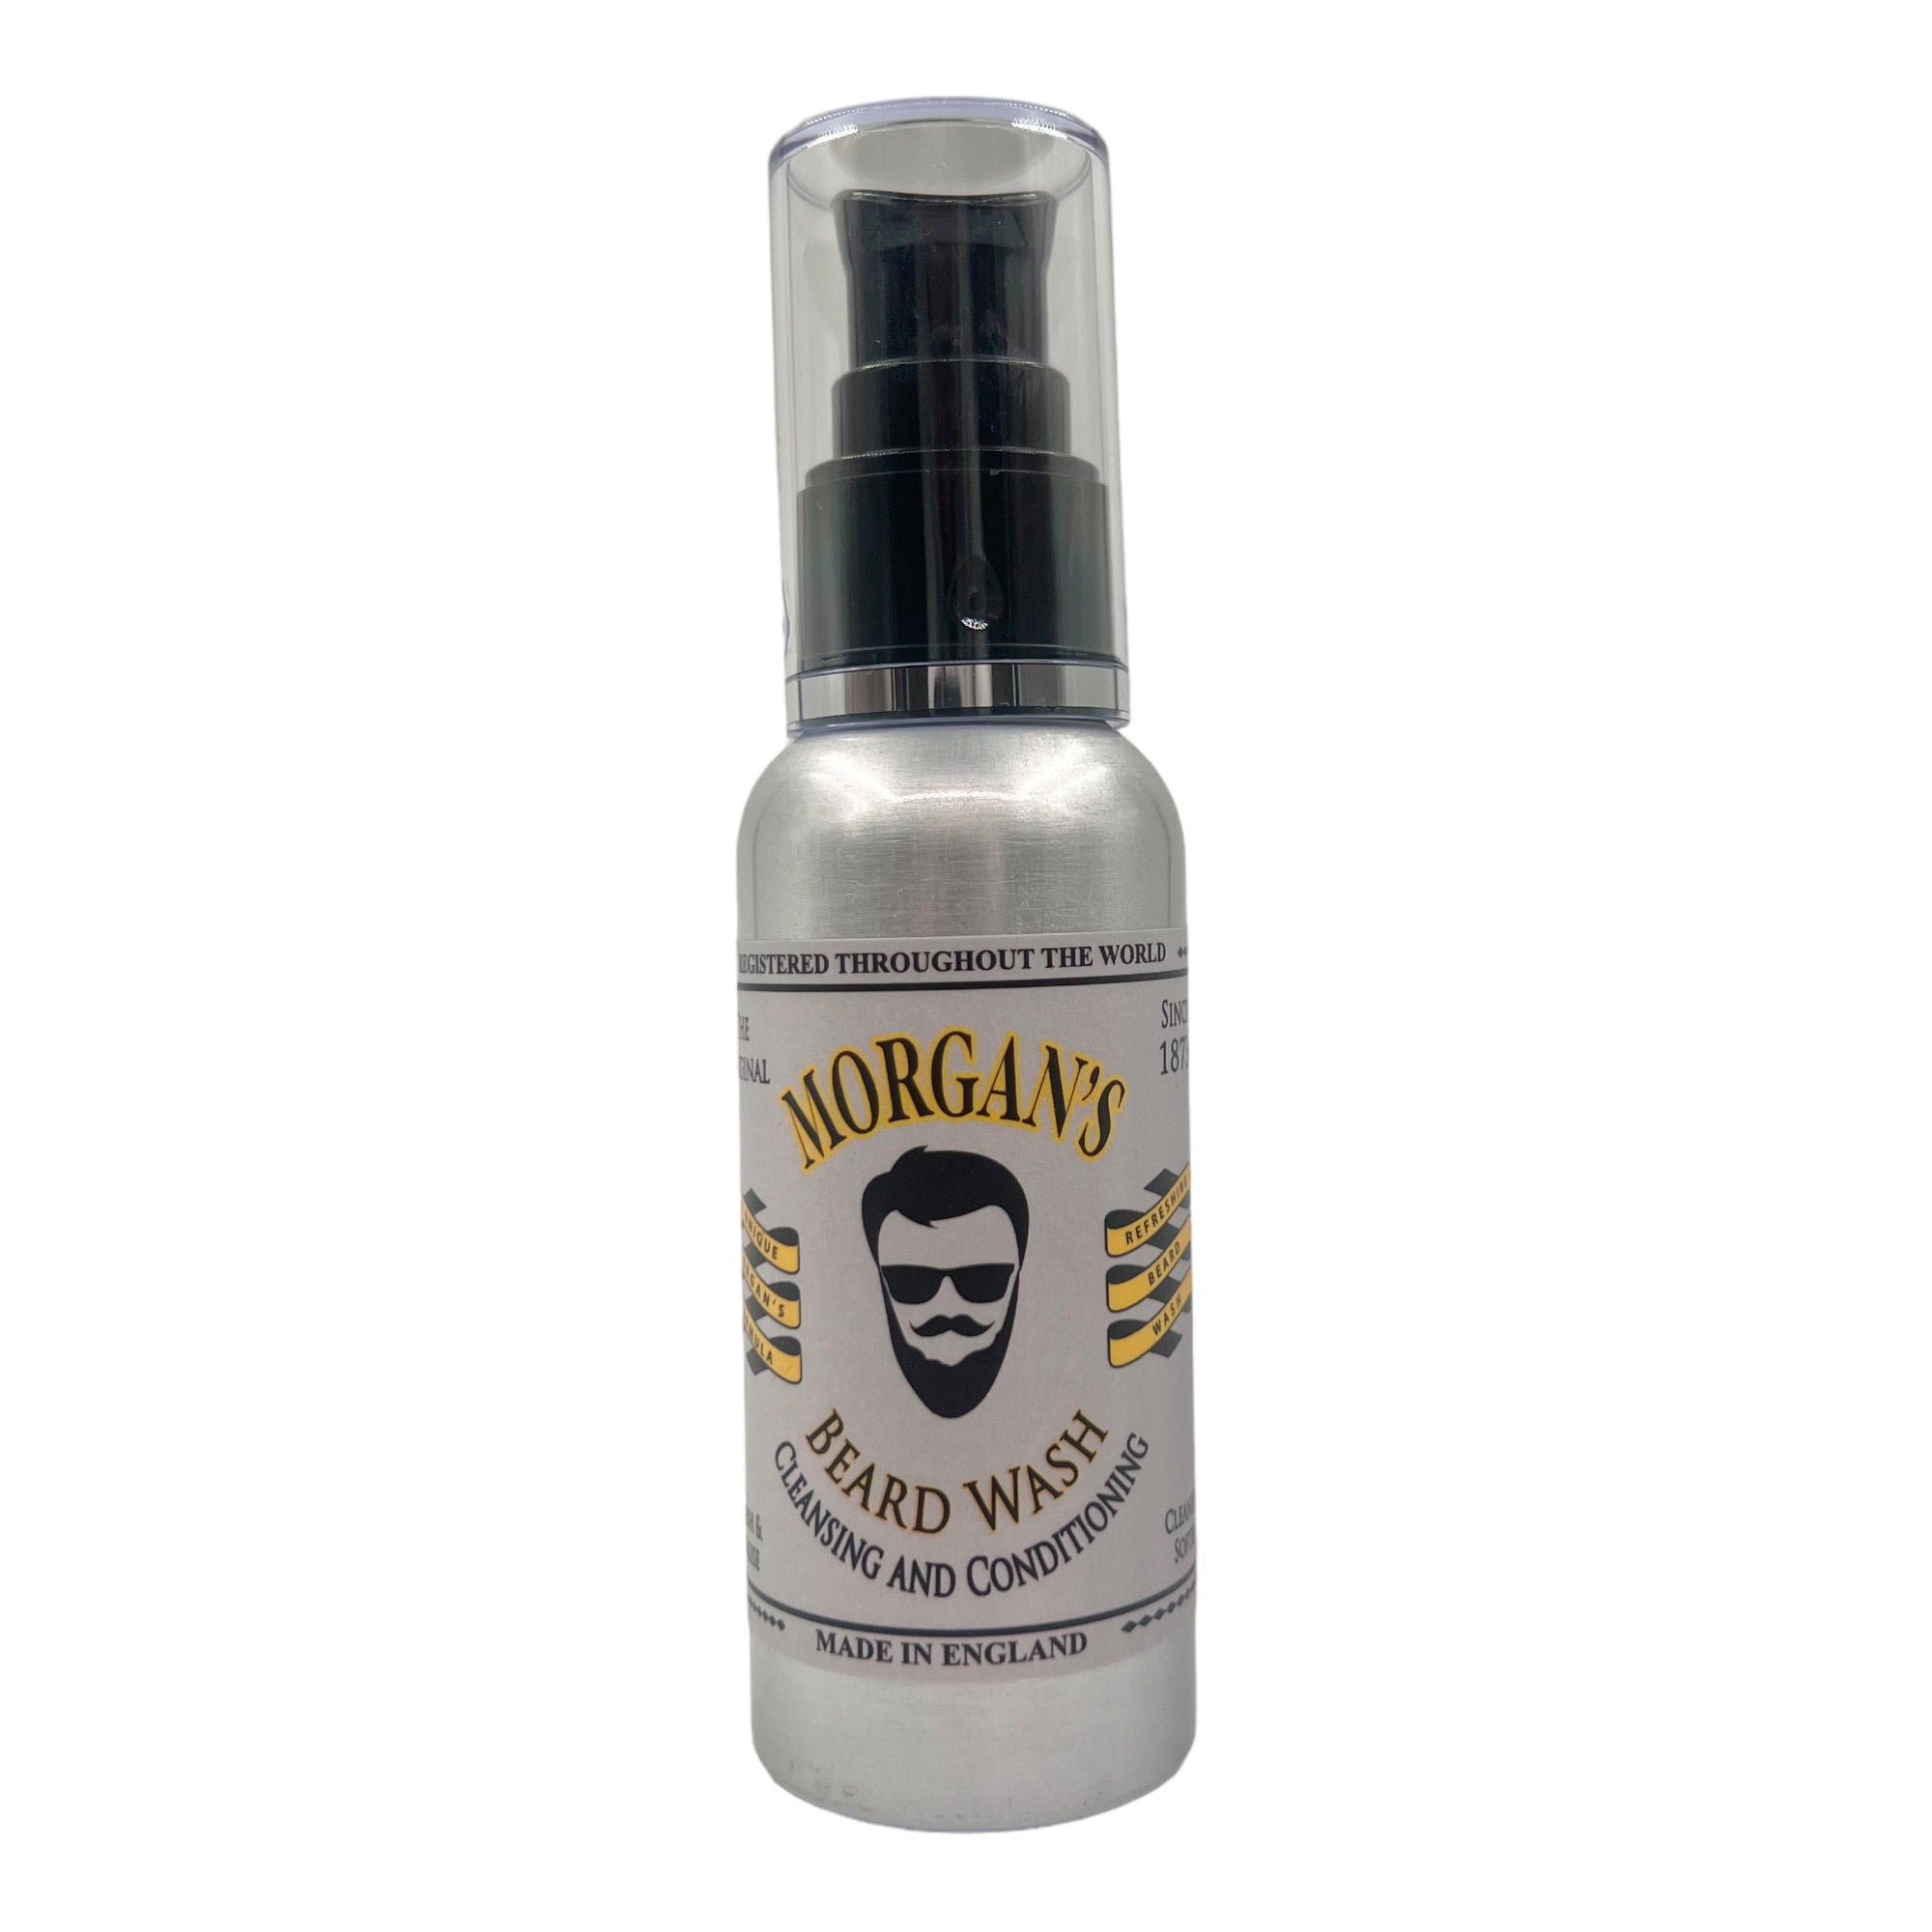 Morgan's - Beard Wash Cleansing & Conditioning 100ml